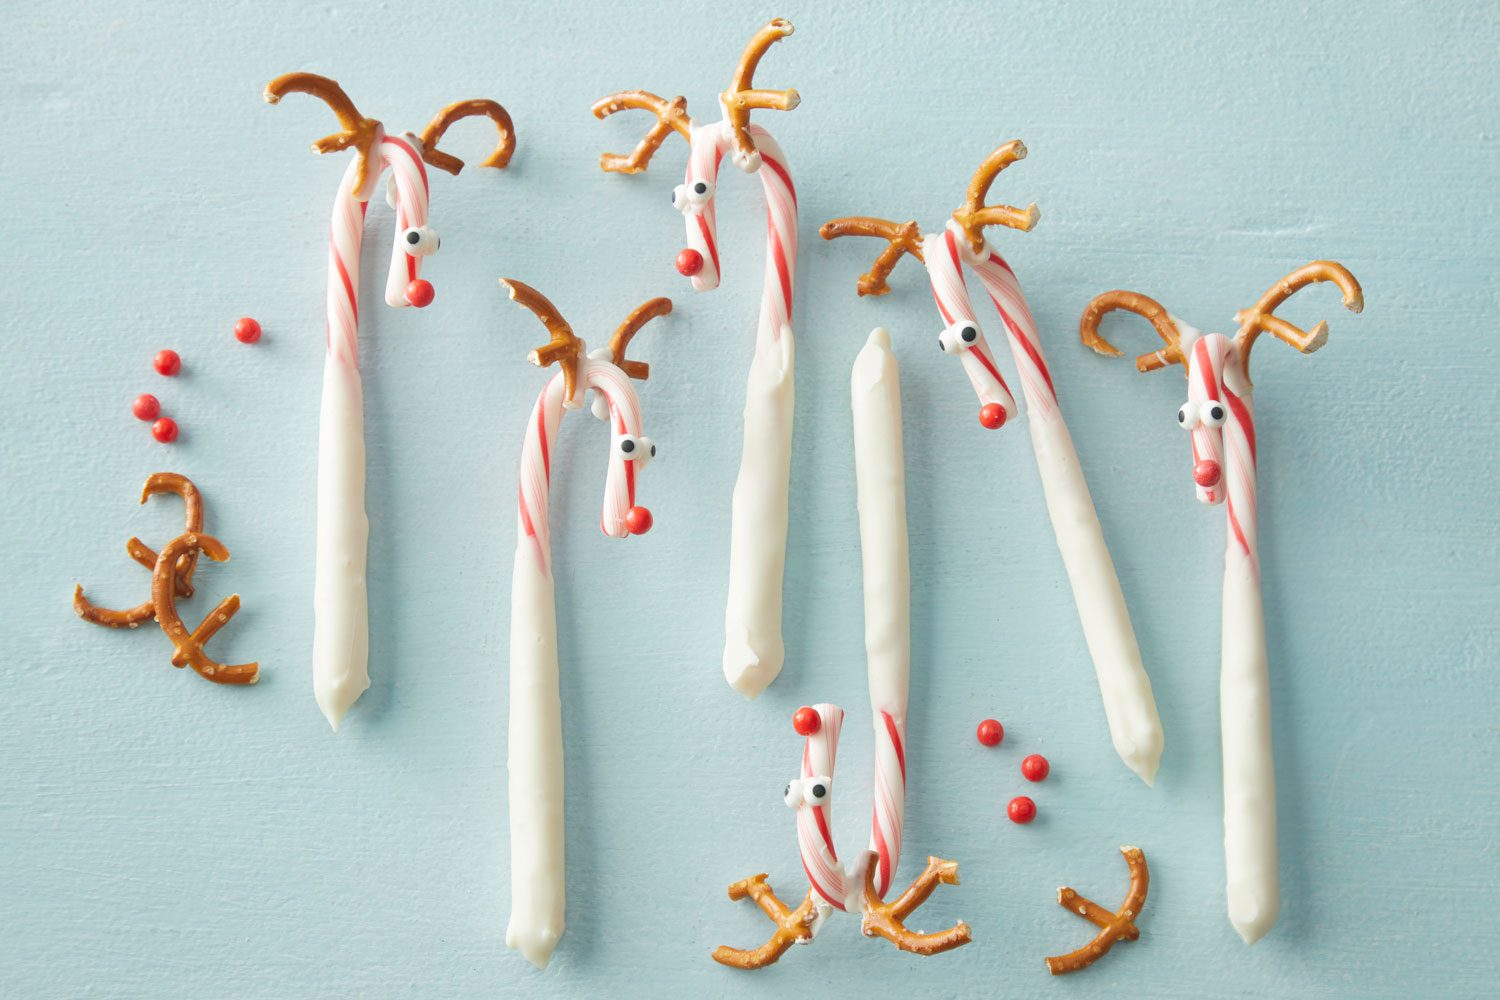 Candy Cane Reindeer on blue background